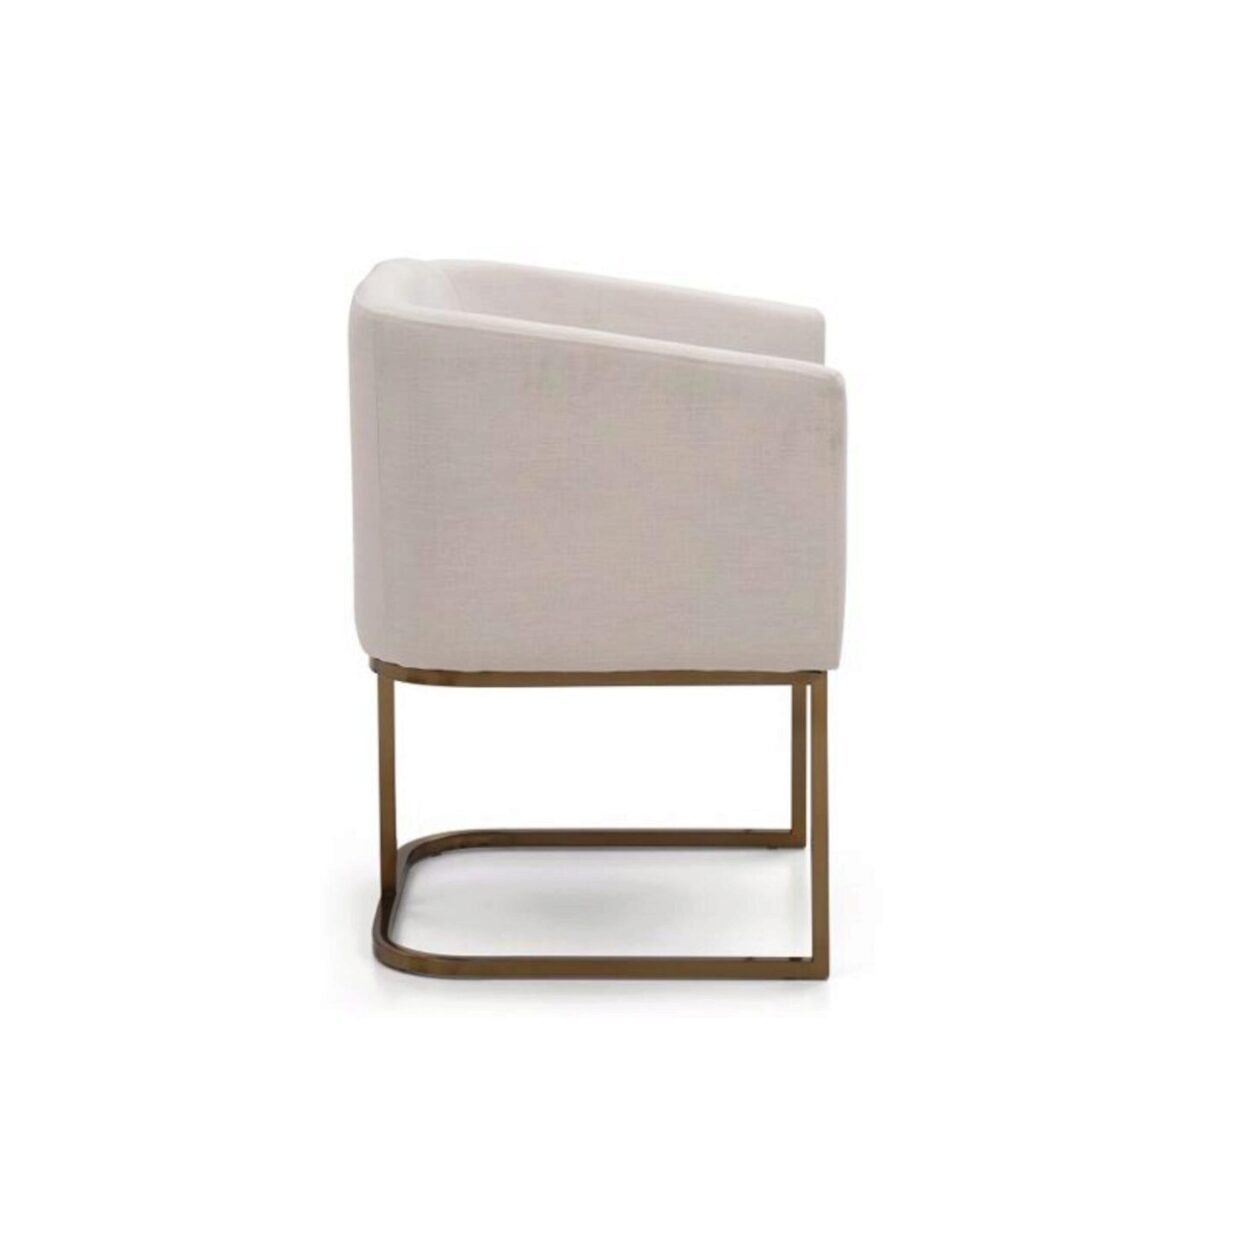 The Parsons Dining Chair